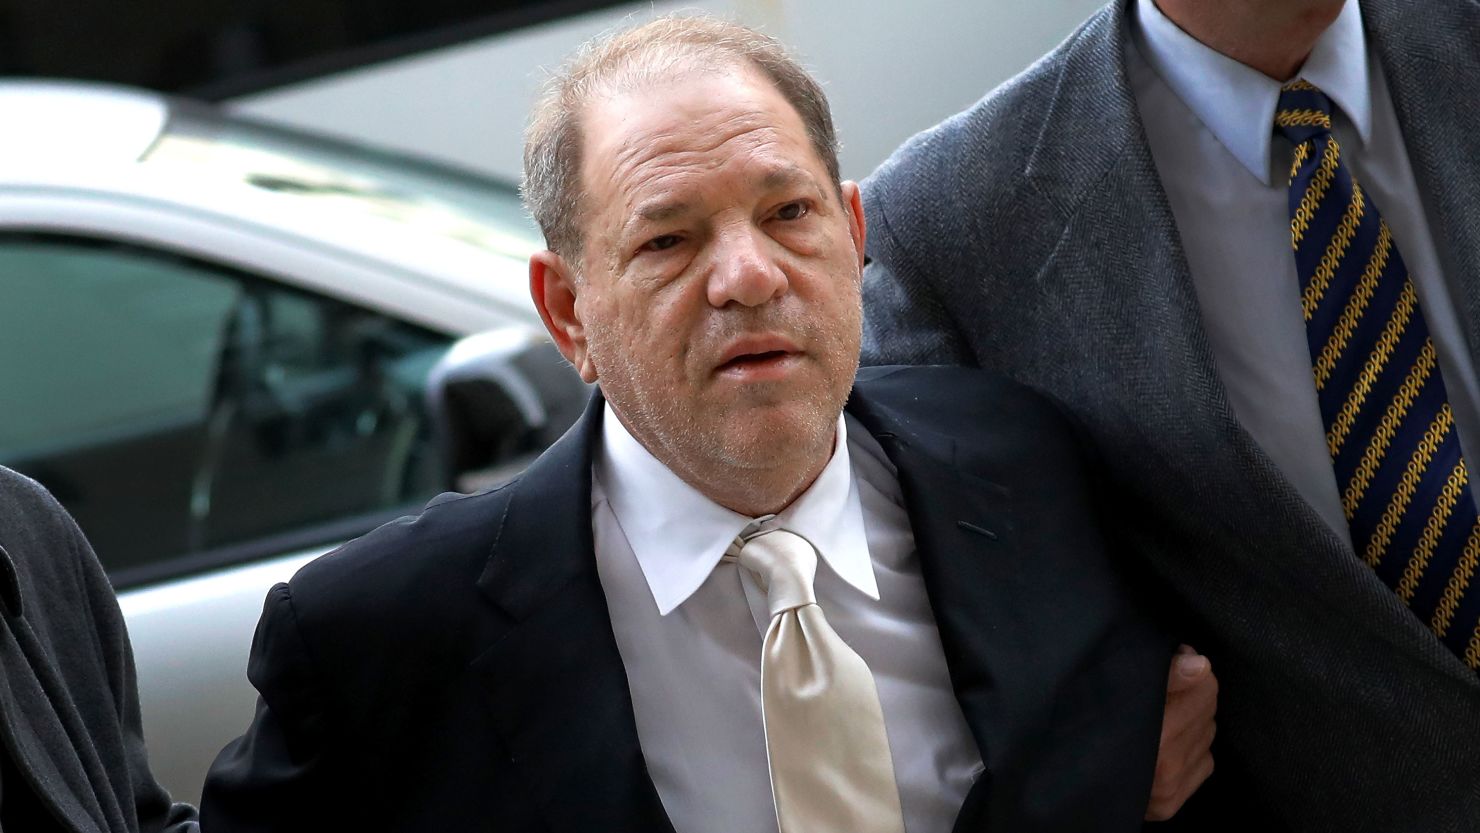 Harvey Weinstein's appeal was filed last April, about one year after he was convicted of first-degree criminal sexual act and third-degree rape.